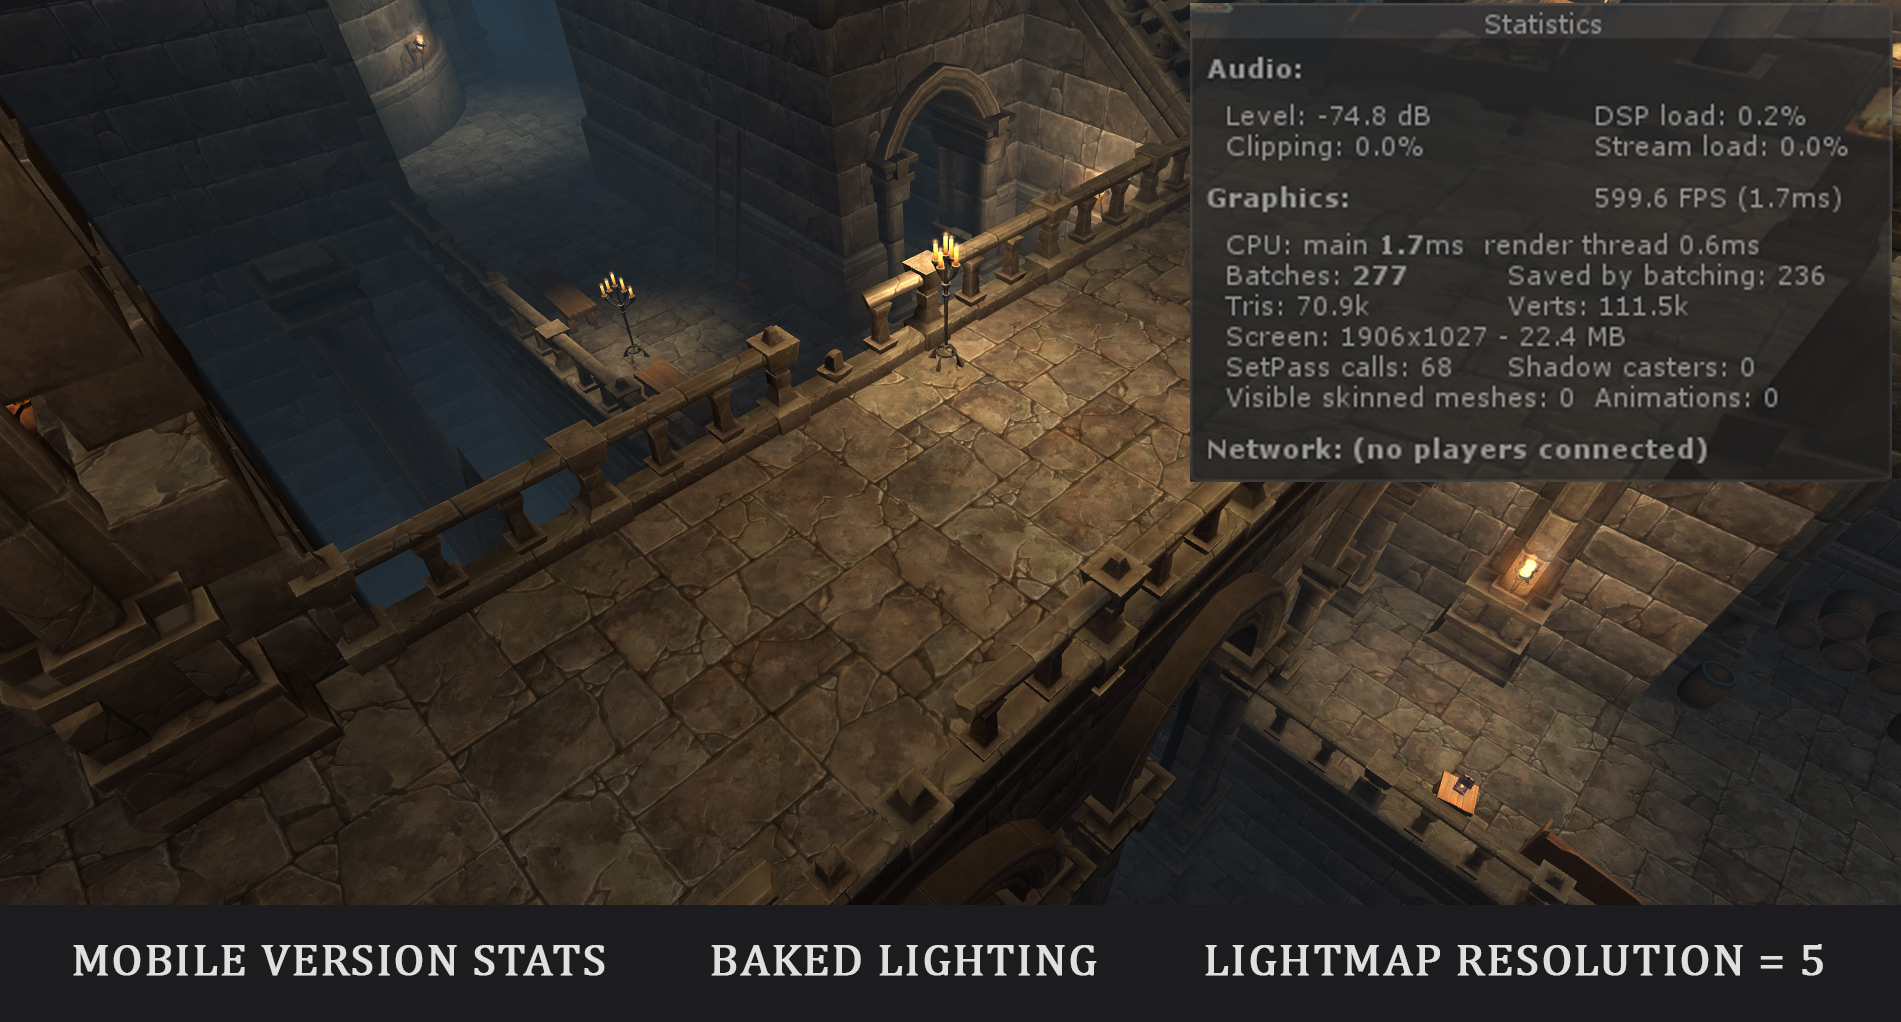 Released] Multistory Dungeons 3D art pack | Page 4 - Unity Forum